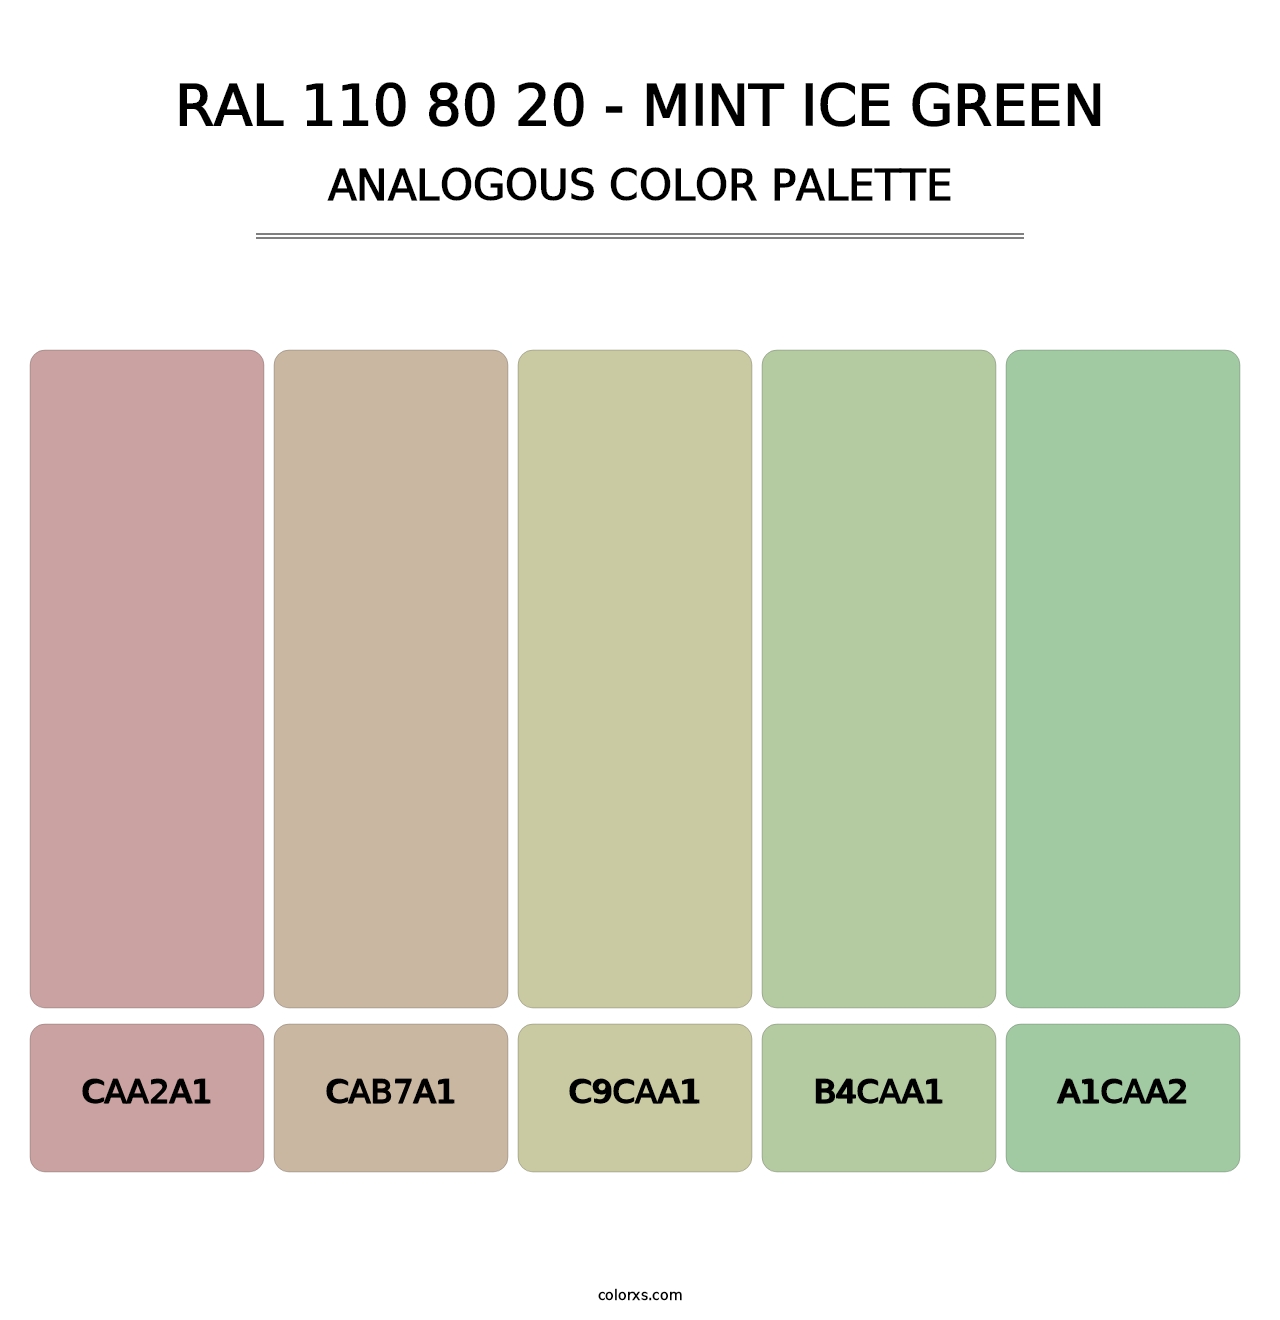 RAL 110 80 20 - Mint Ice Green - Analogous Color Palette